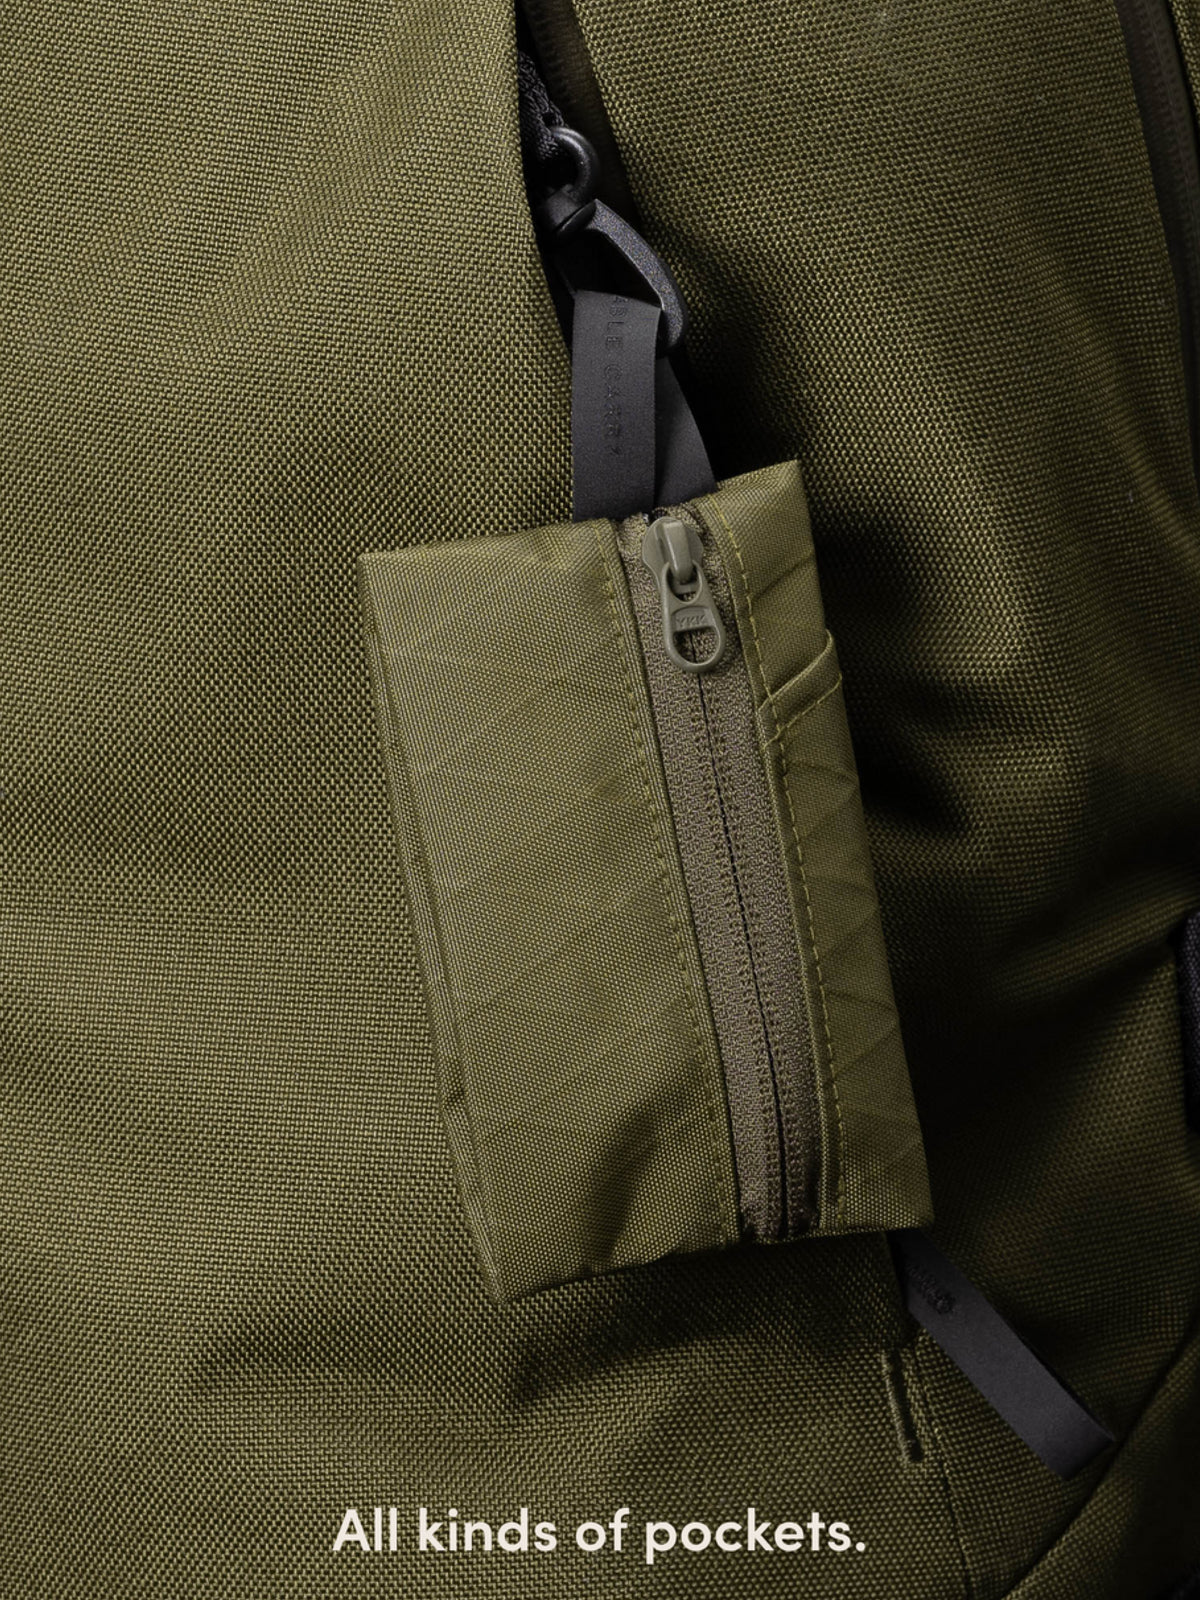 Able Carry Joey Pouch Cordura X-Pac White Alpine